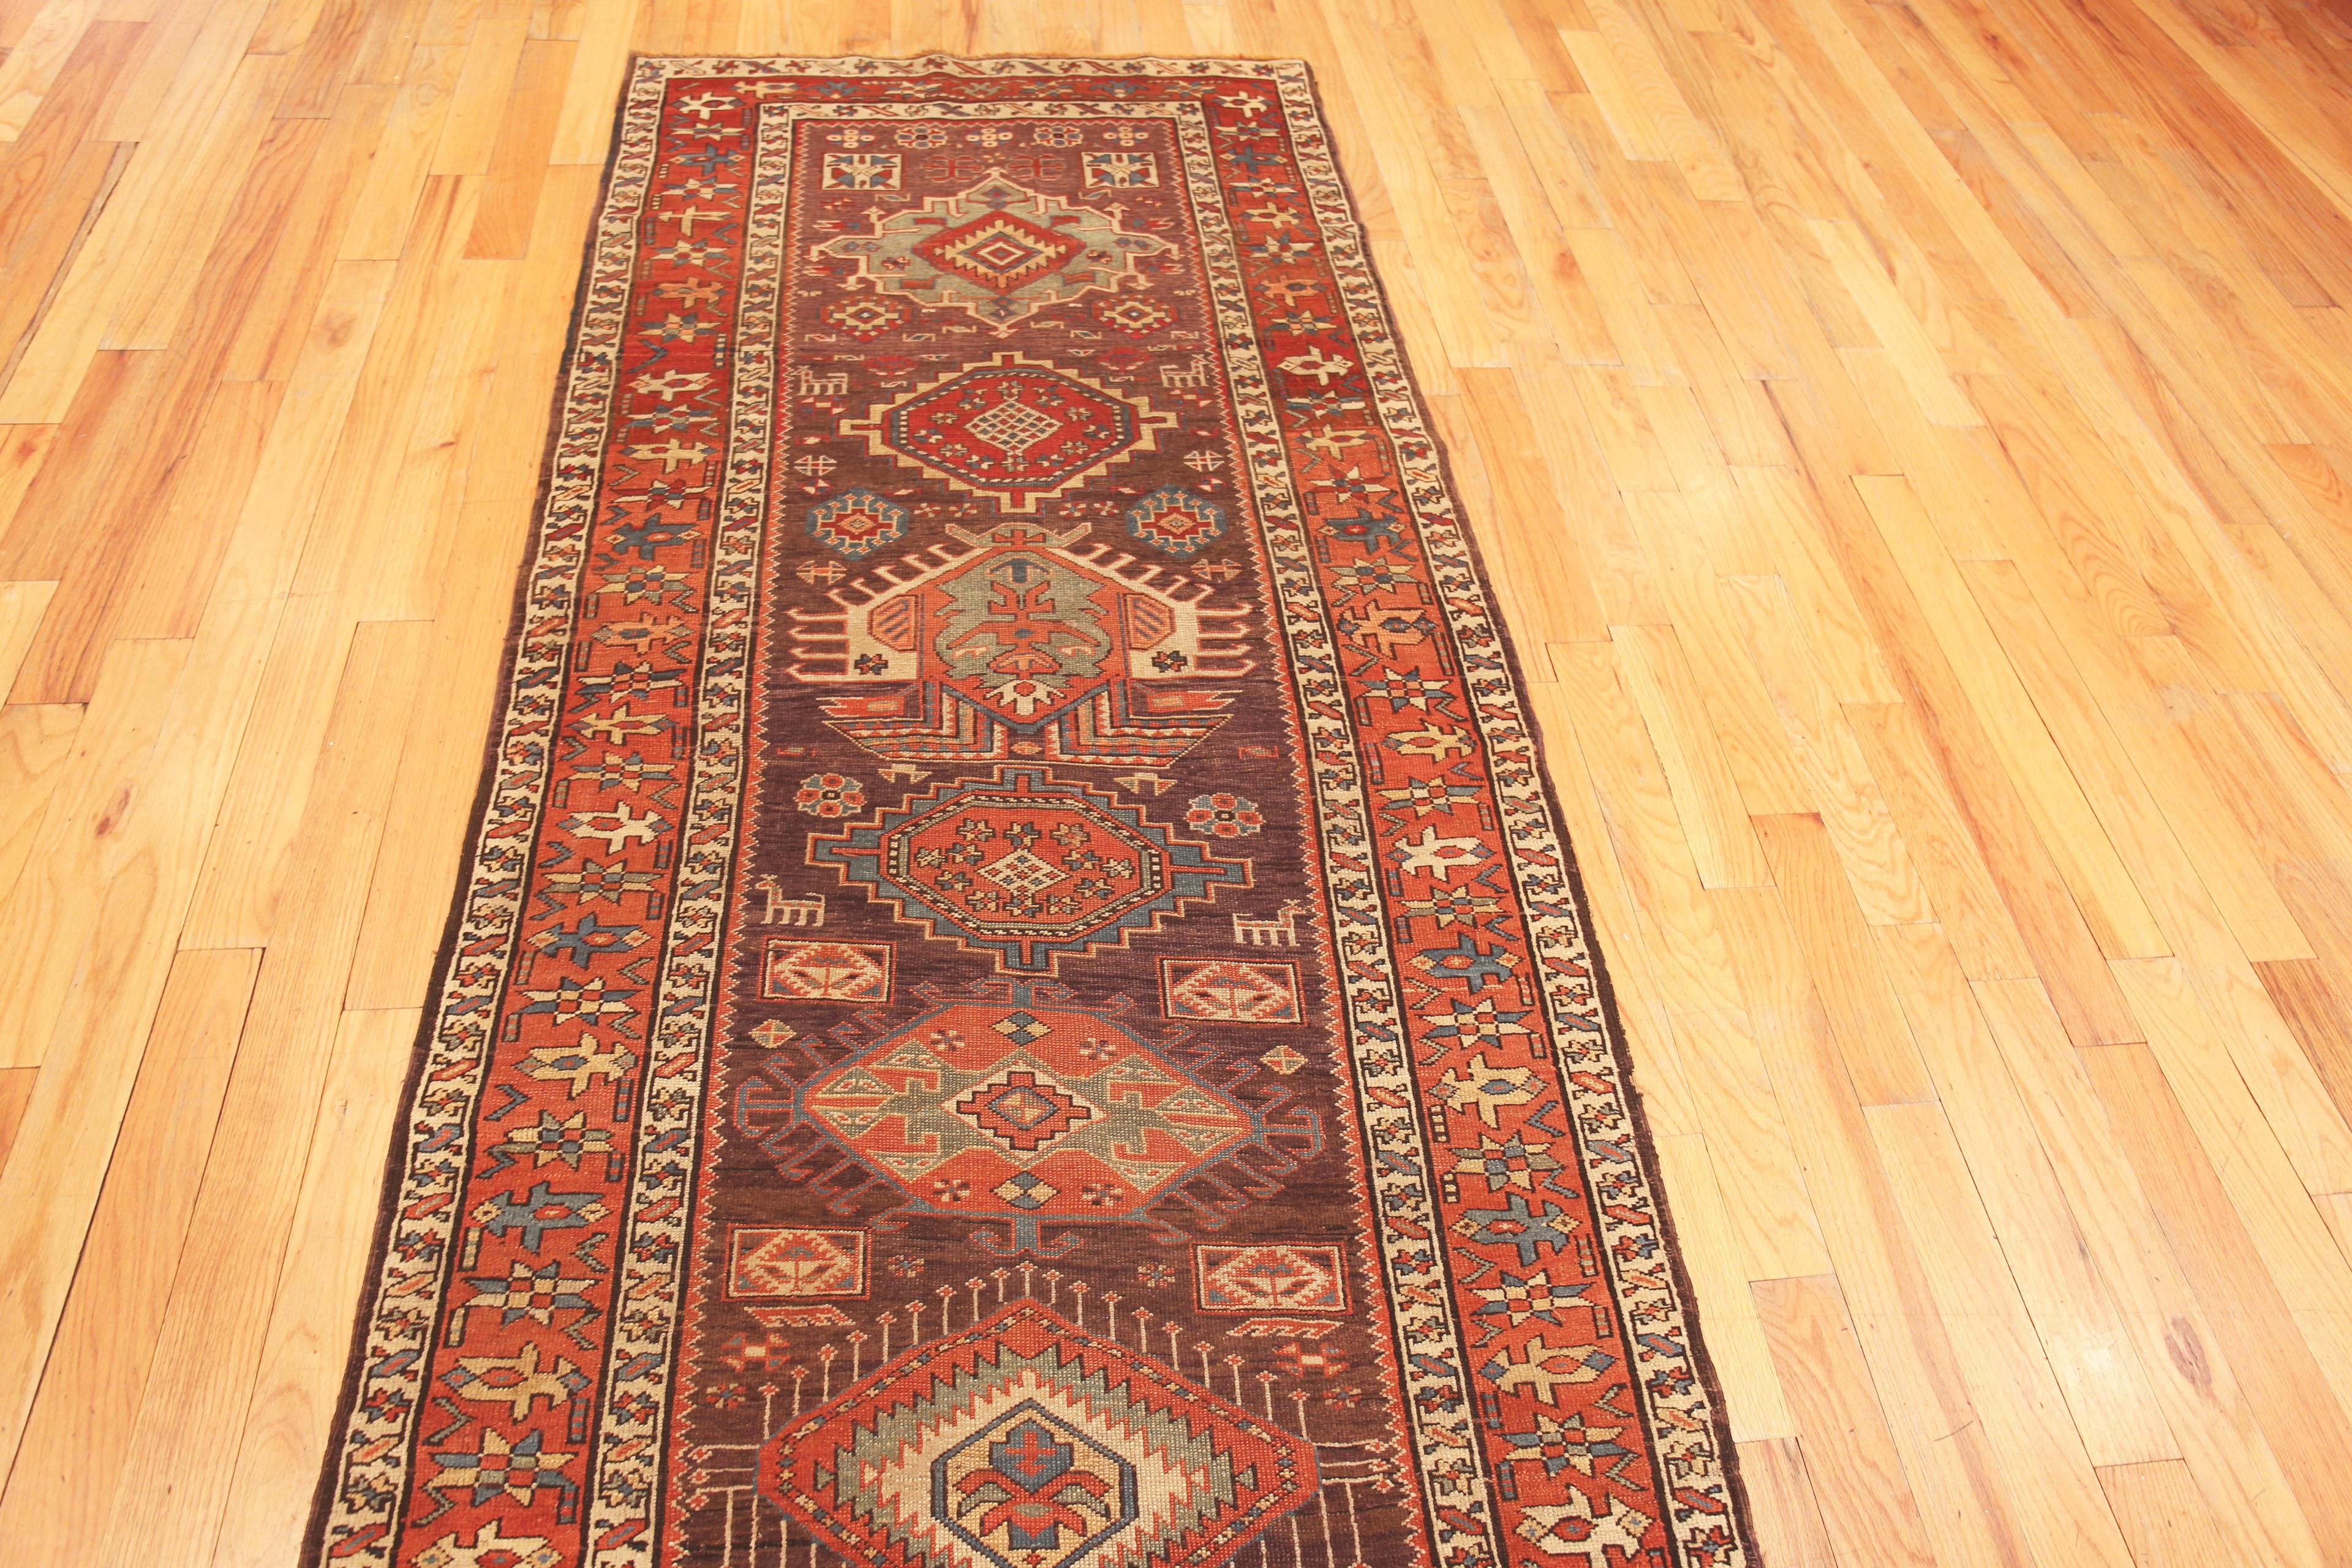 Soft Purple Tribal Antique North West Persian Tribal Abrash Runner Rug, Country of Origin: Persia, Circa date: 1920. Size: 3 ft 8 in x 14 ft 3 in (1.12 m x 4.34 m)
